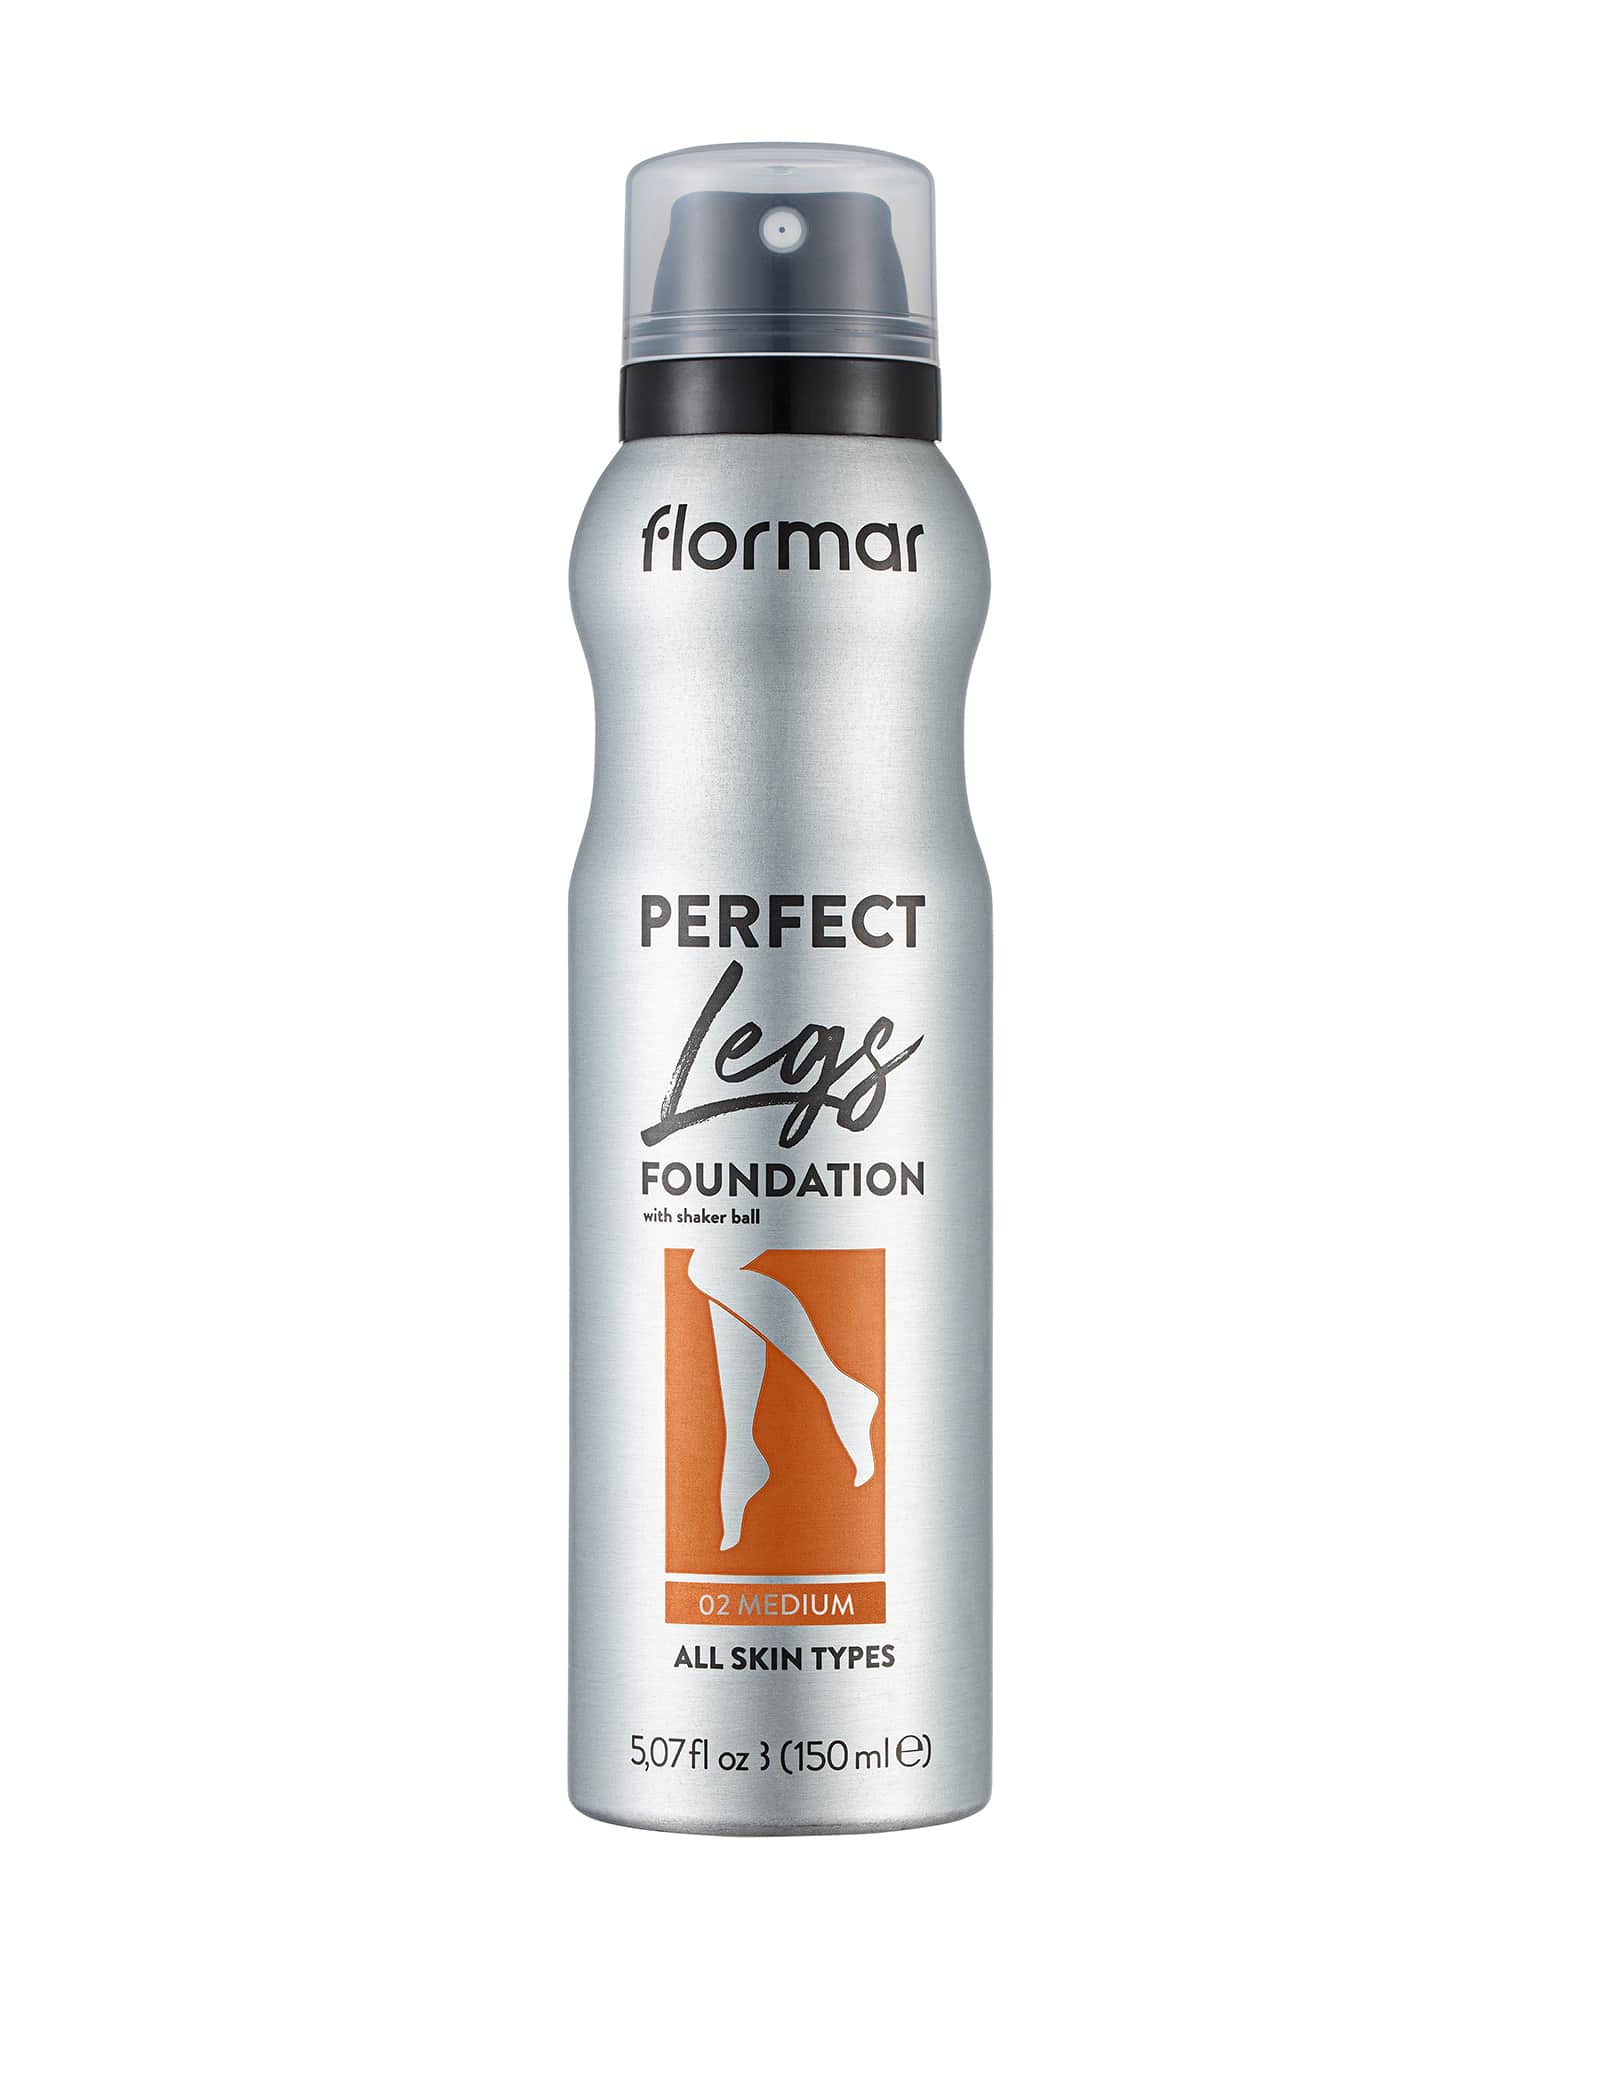 Flormar Perfect Foundation for Legs - 02